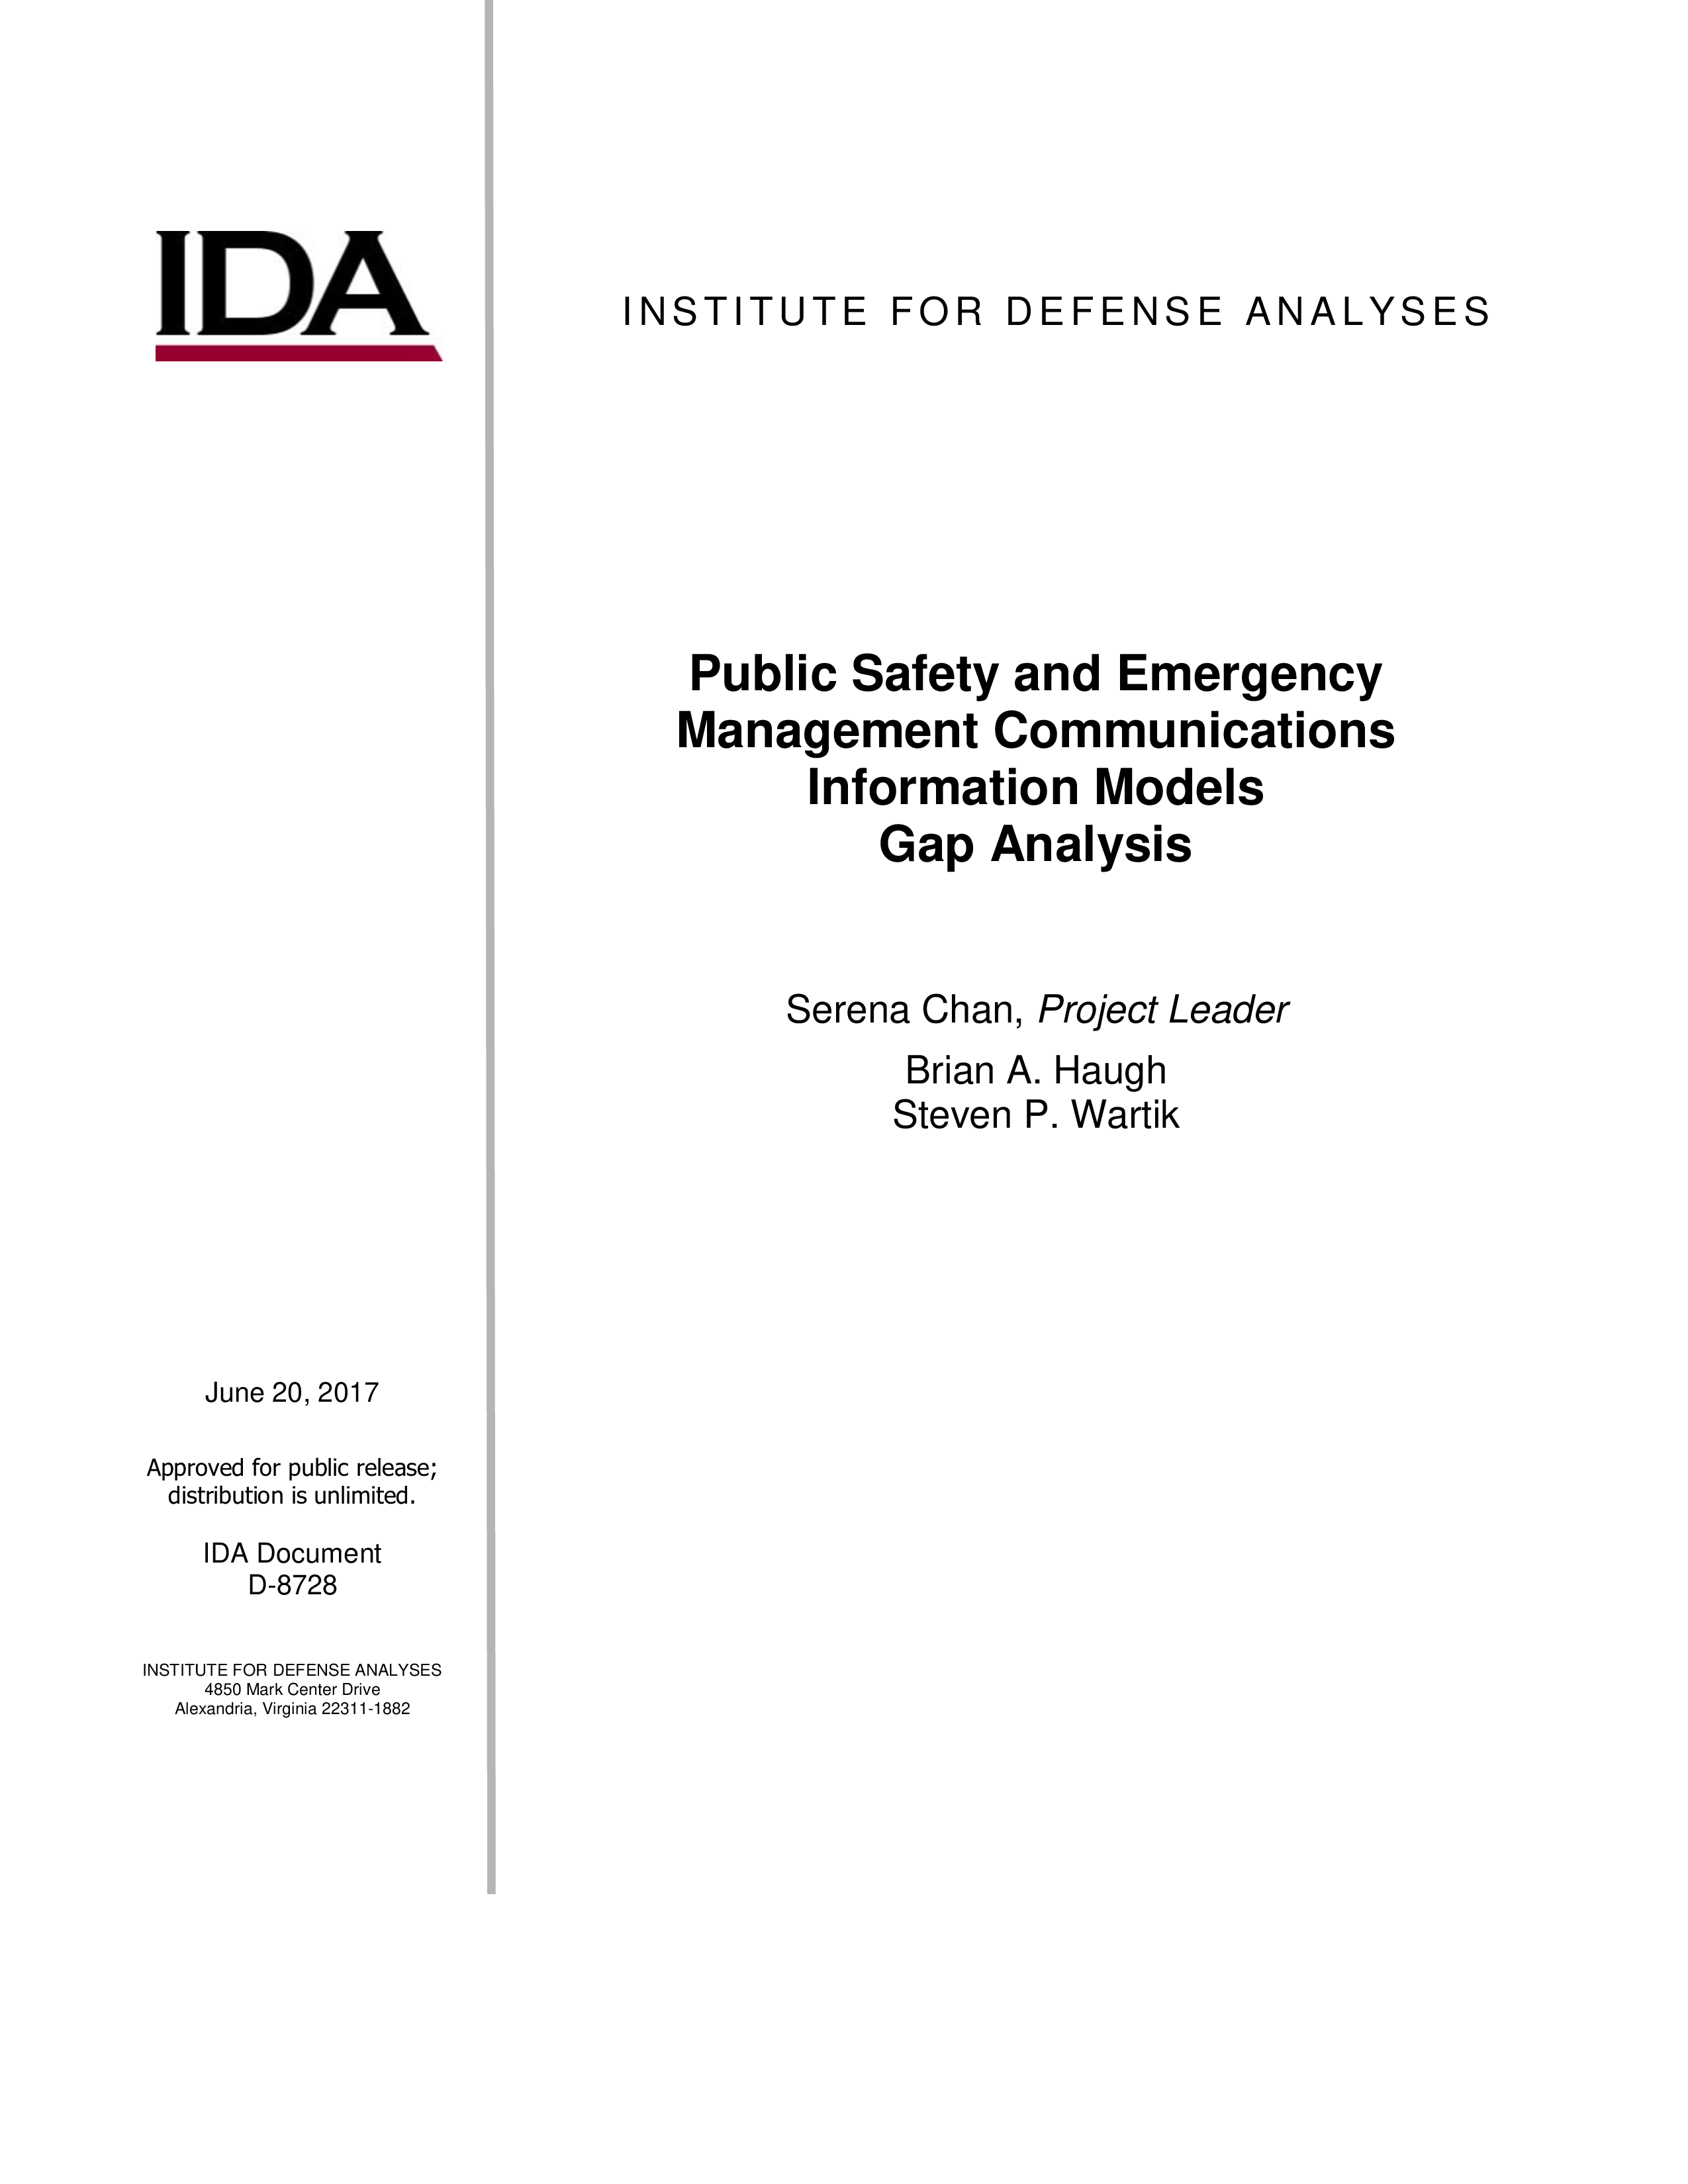 Public Safety and Emergency Management Communications Information Models Gap Analysis